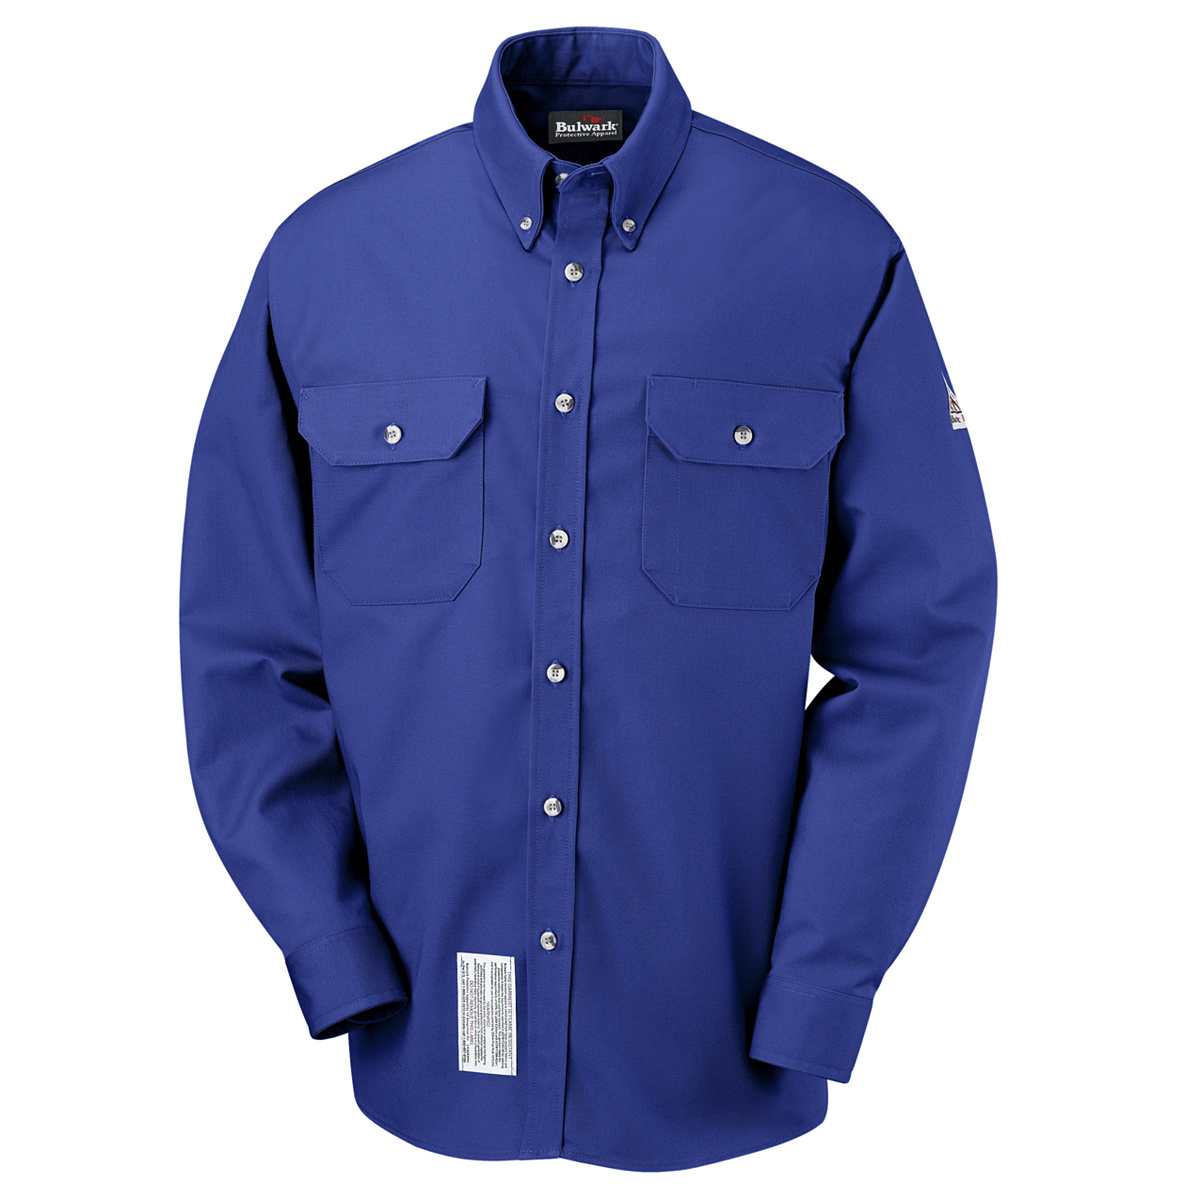 Bulwark® 3X Tall Royal Blue Westex Ultrasoft®/Cotton/Nylon Flame Resistant Dress Shirt With Button Front Closure